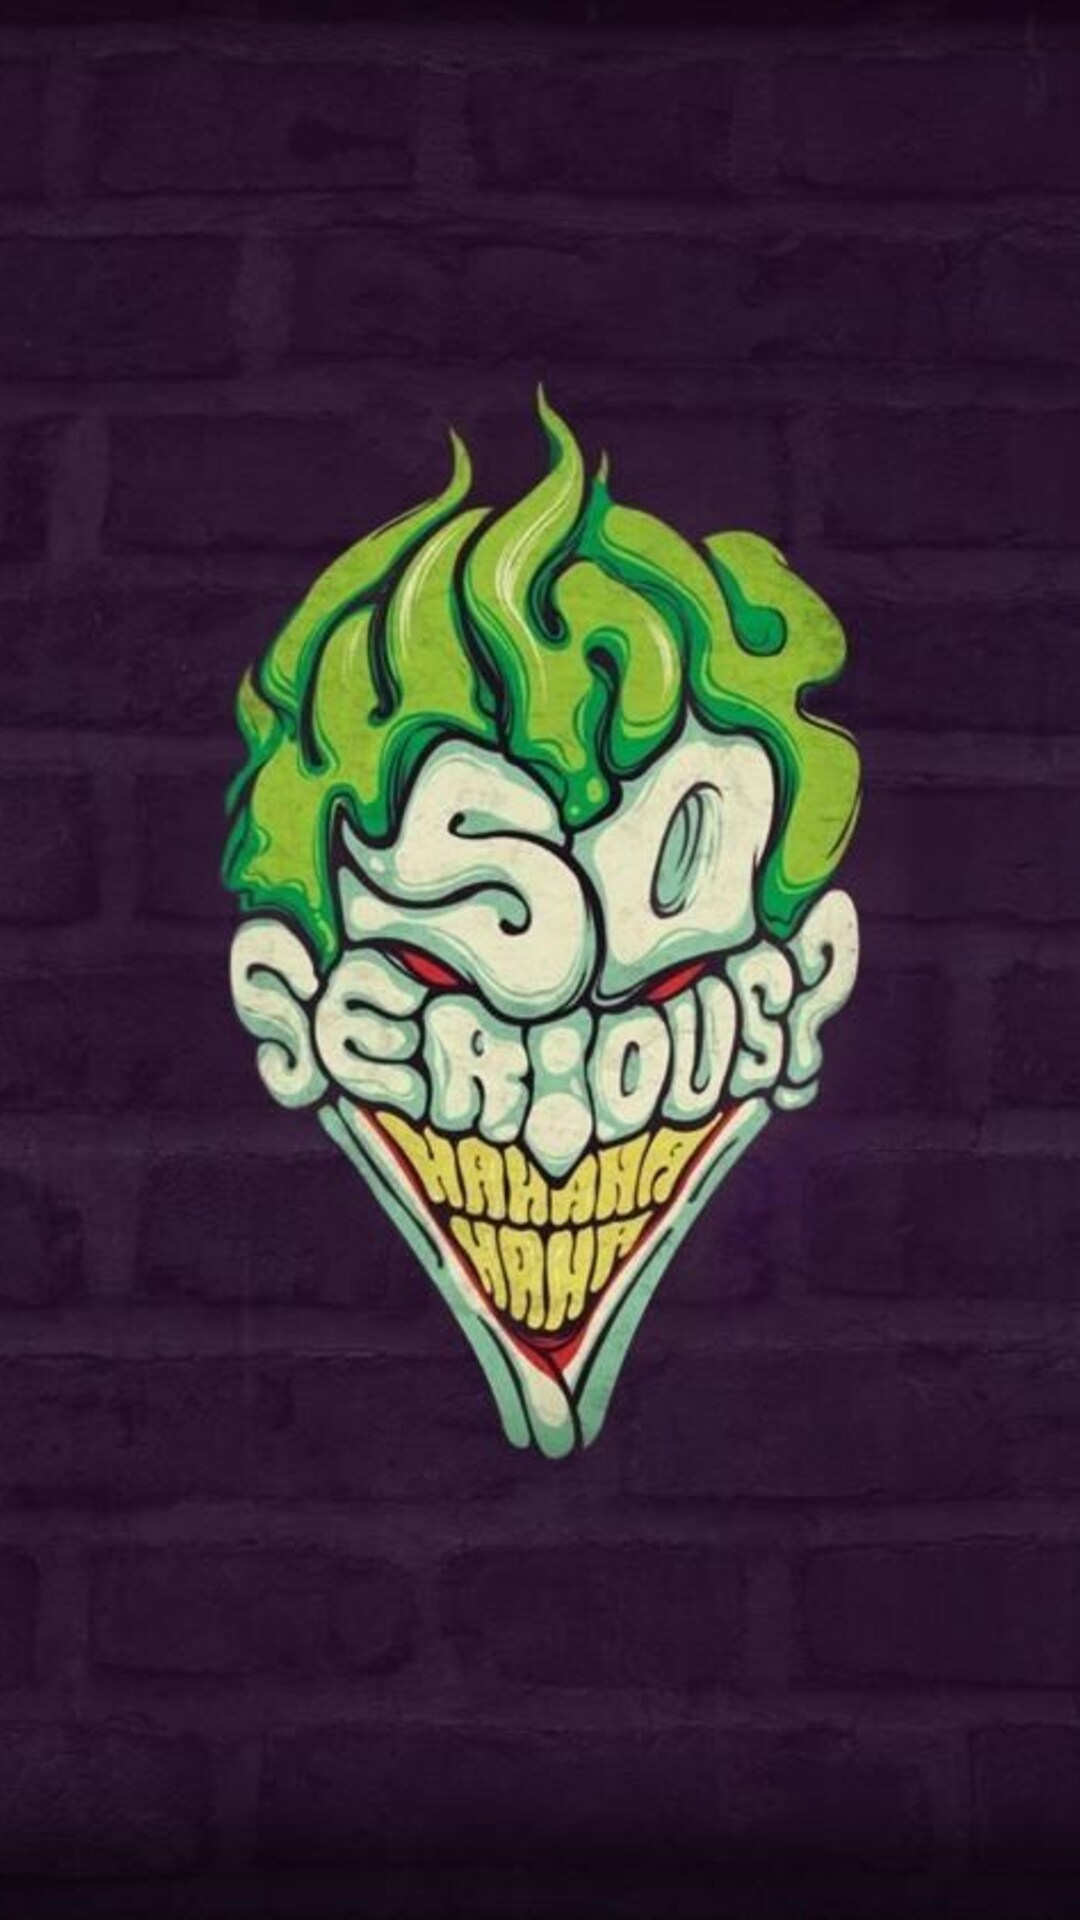 So Serious Joker iPhone 6s, 6 Plus, Pixel xl , One Plus 3t, 5 HD 4k Wallpaper, Image, Background, Photo and Picture